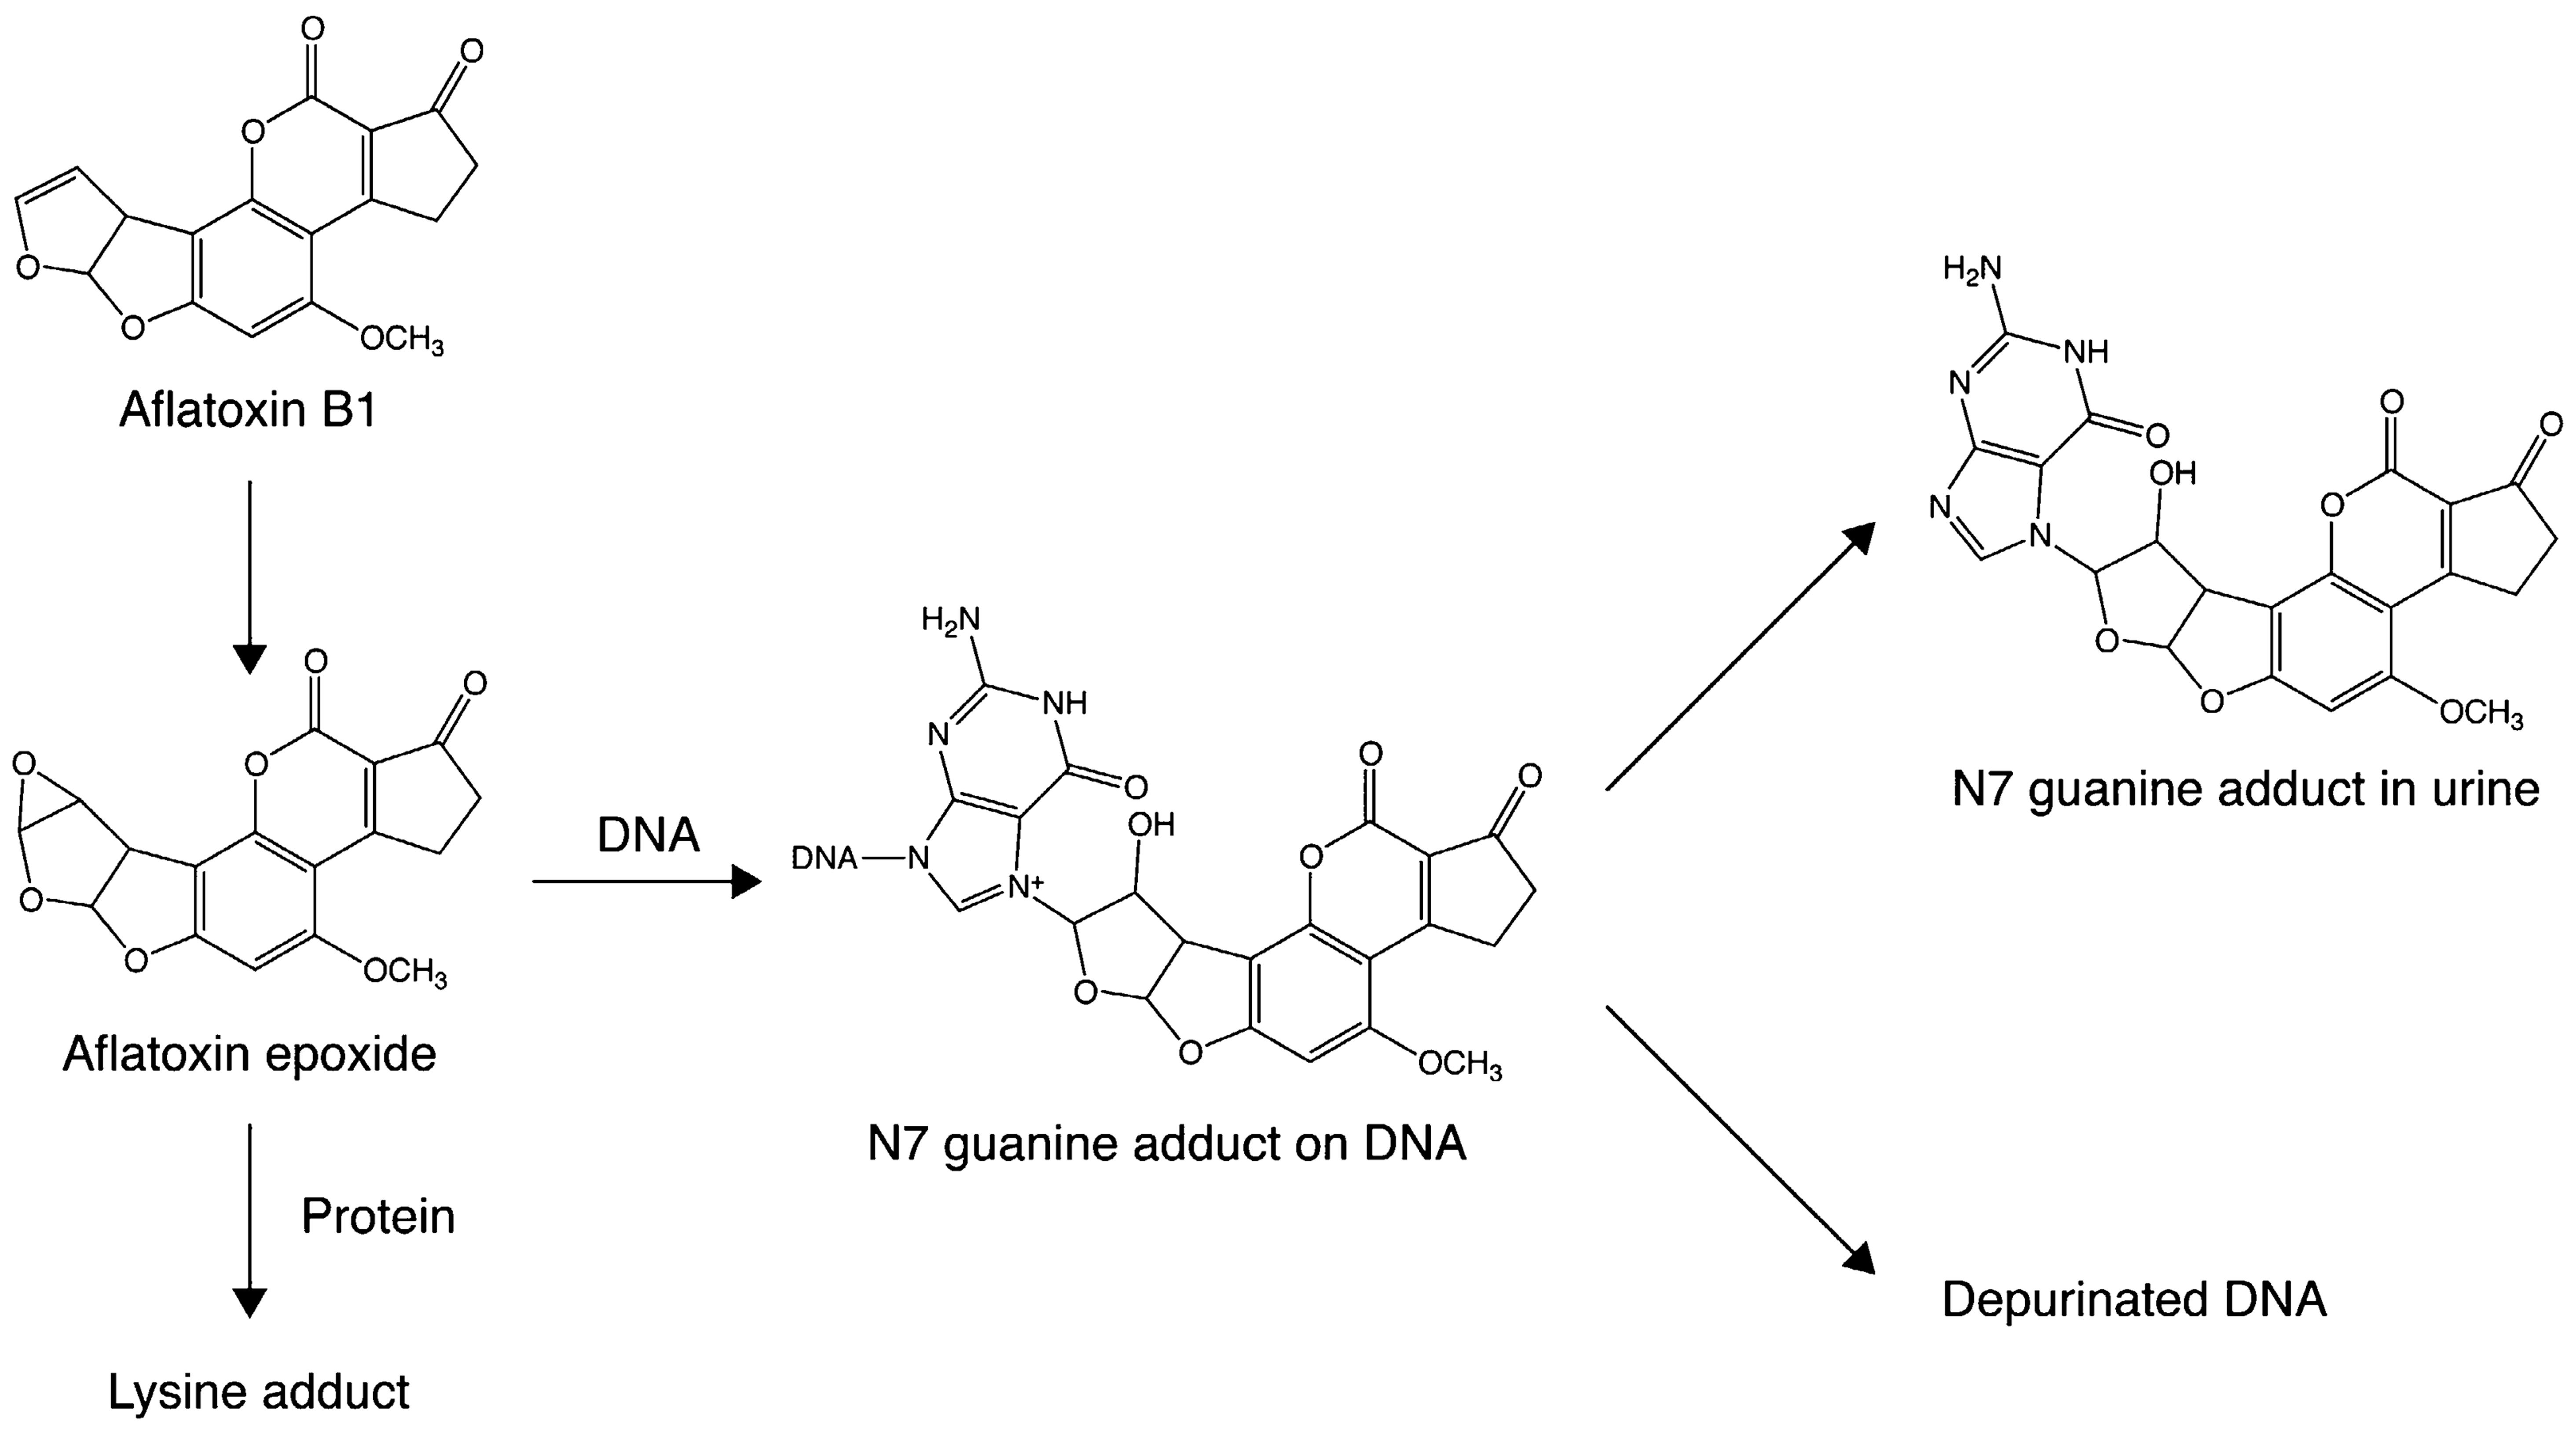 Metabolism of aflatoxin B<sub>1</sub> to the reactive epoxide, which can bind with protein to form adducts at lysine residues or react with DNA to form the N7 guanine adduct